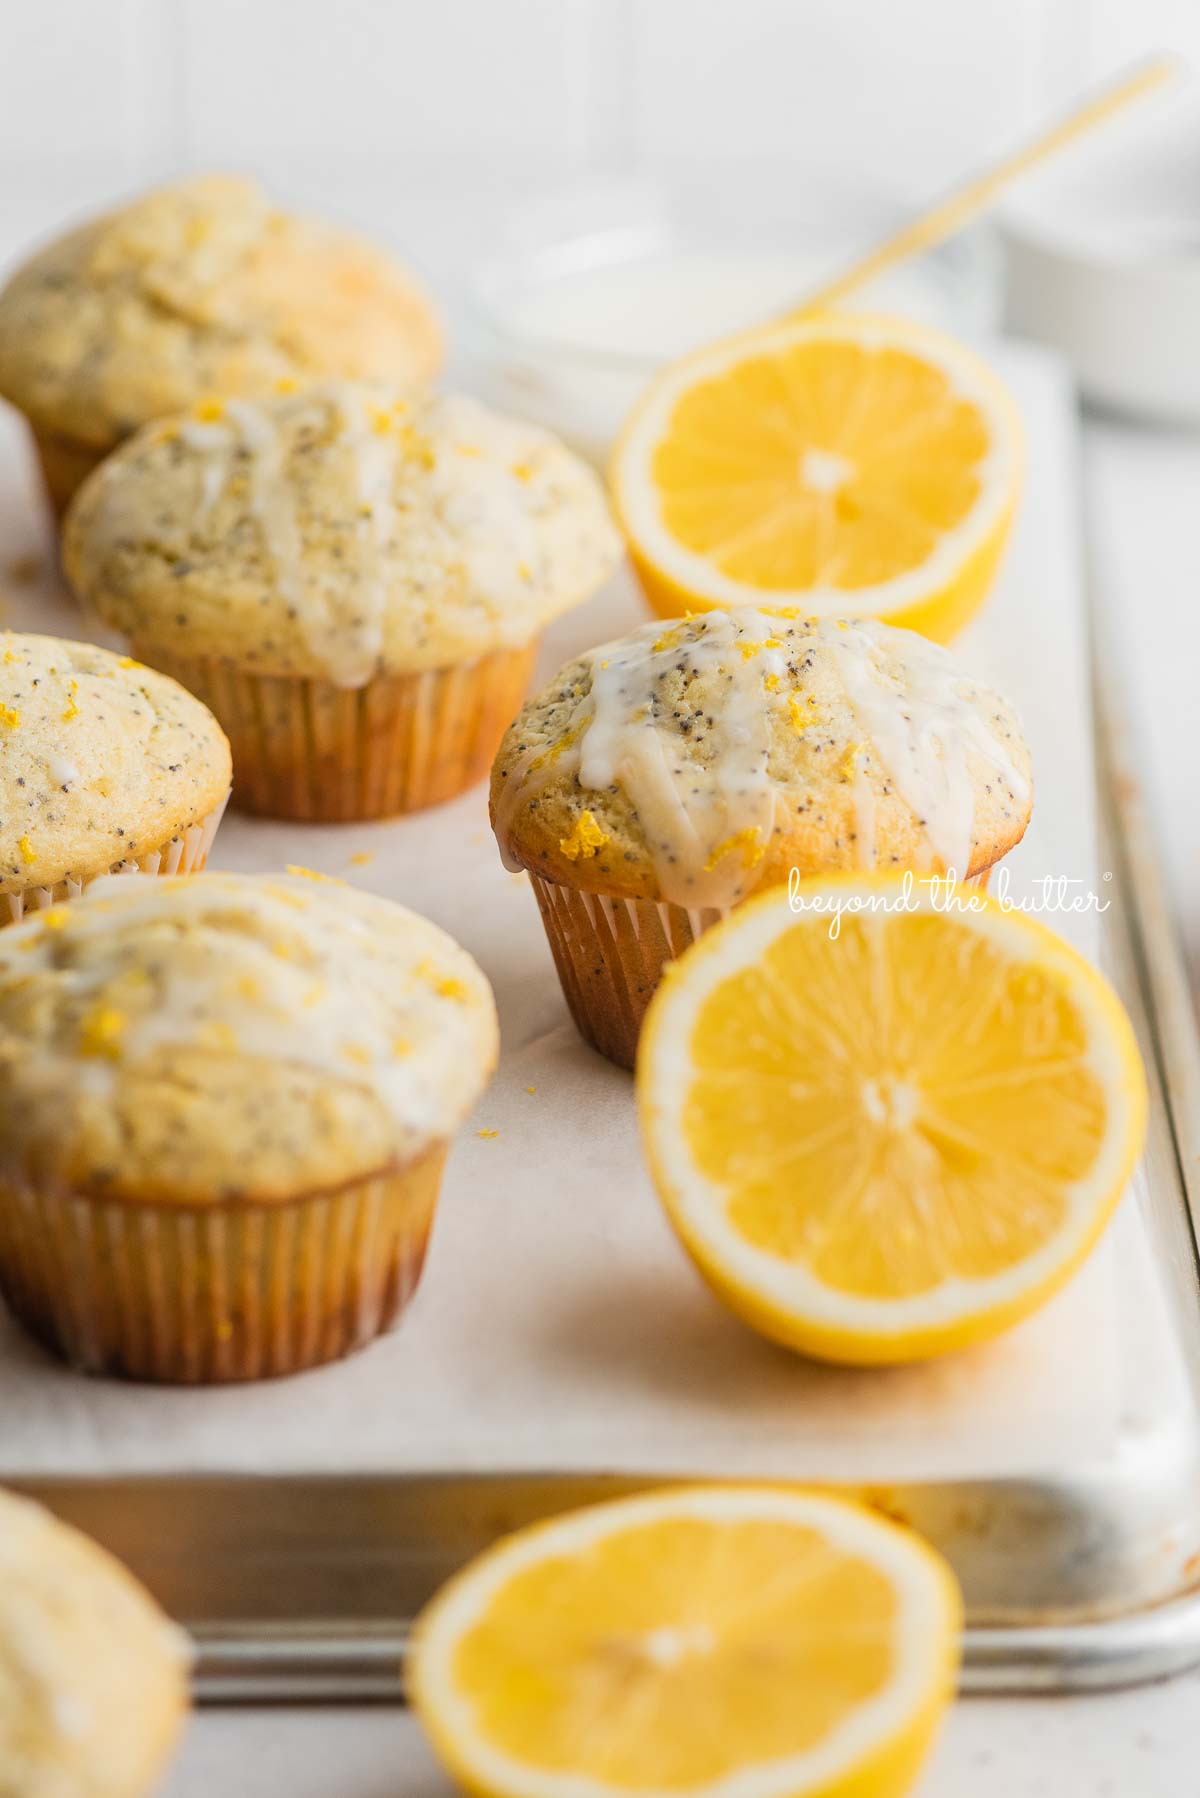 Lemon poppyseed muffins randomly placed on a white parchment paper inverted baking sheet with bowl of glaze and half slices of lemons next to them.